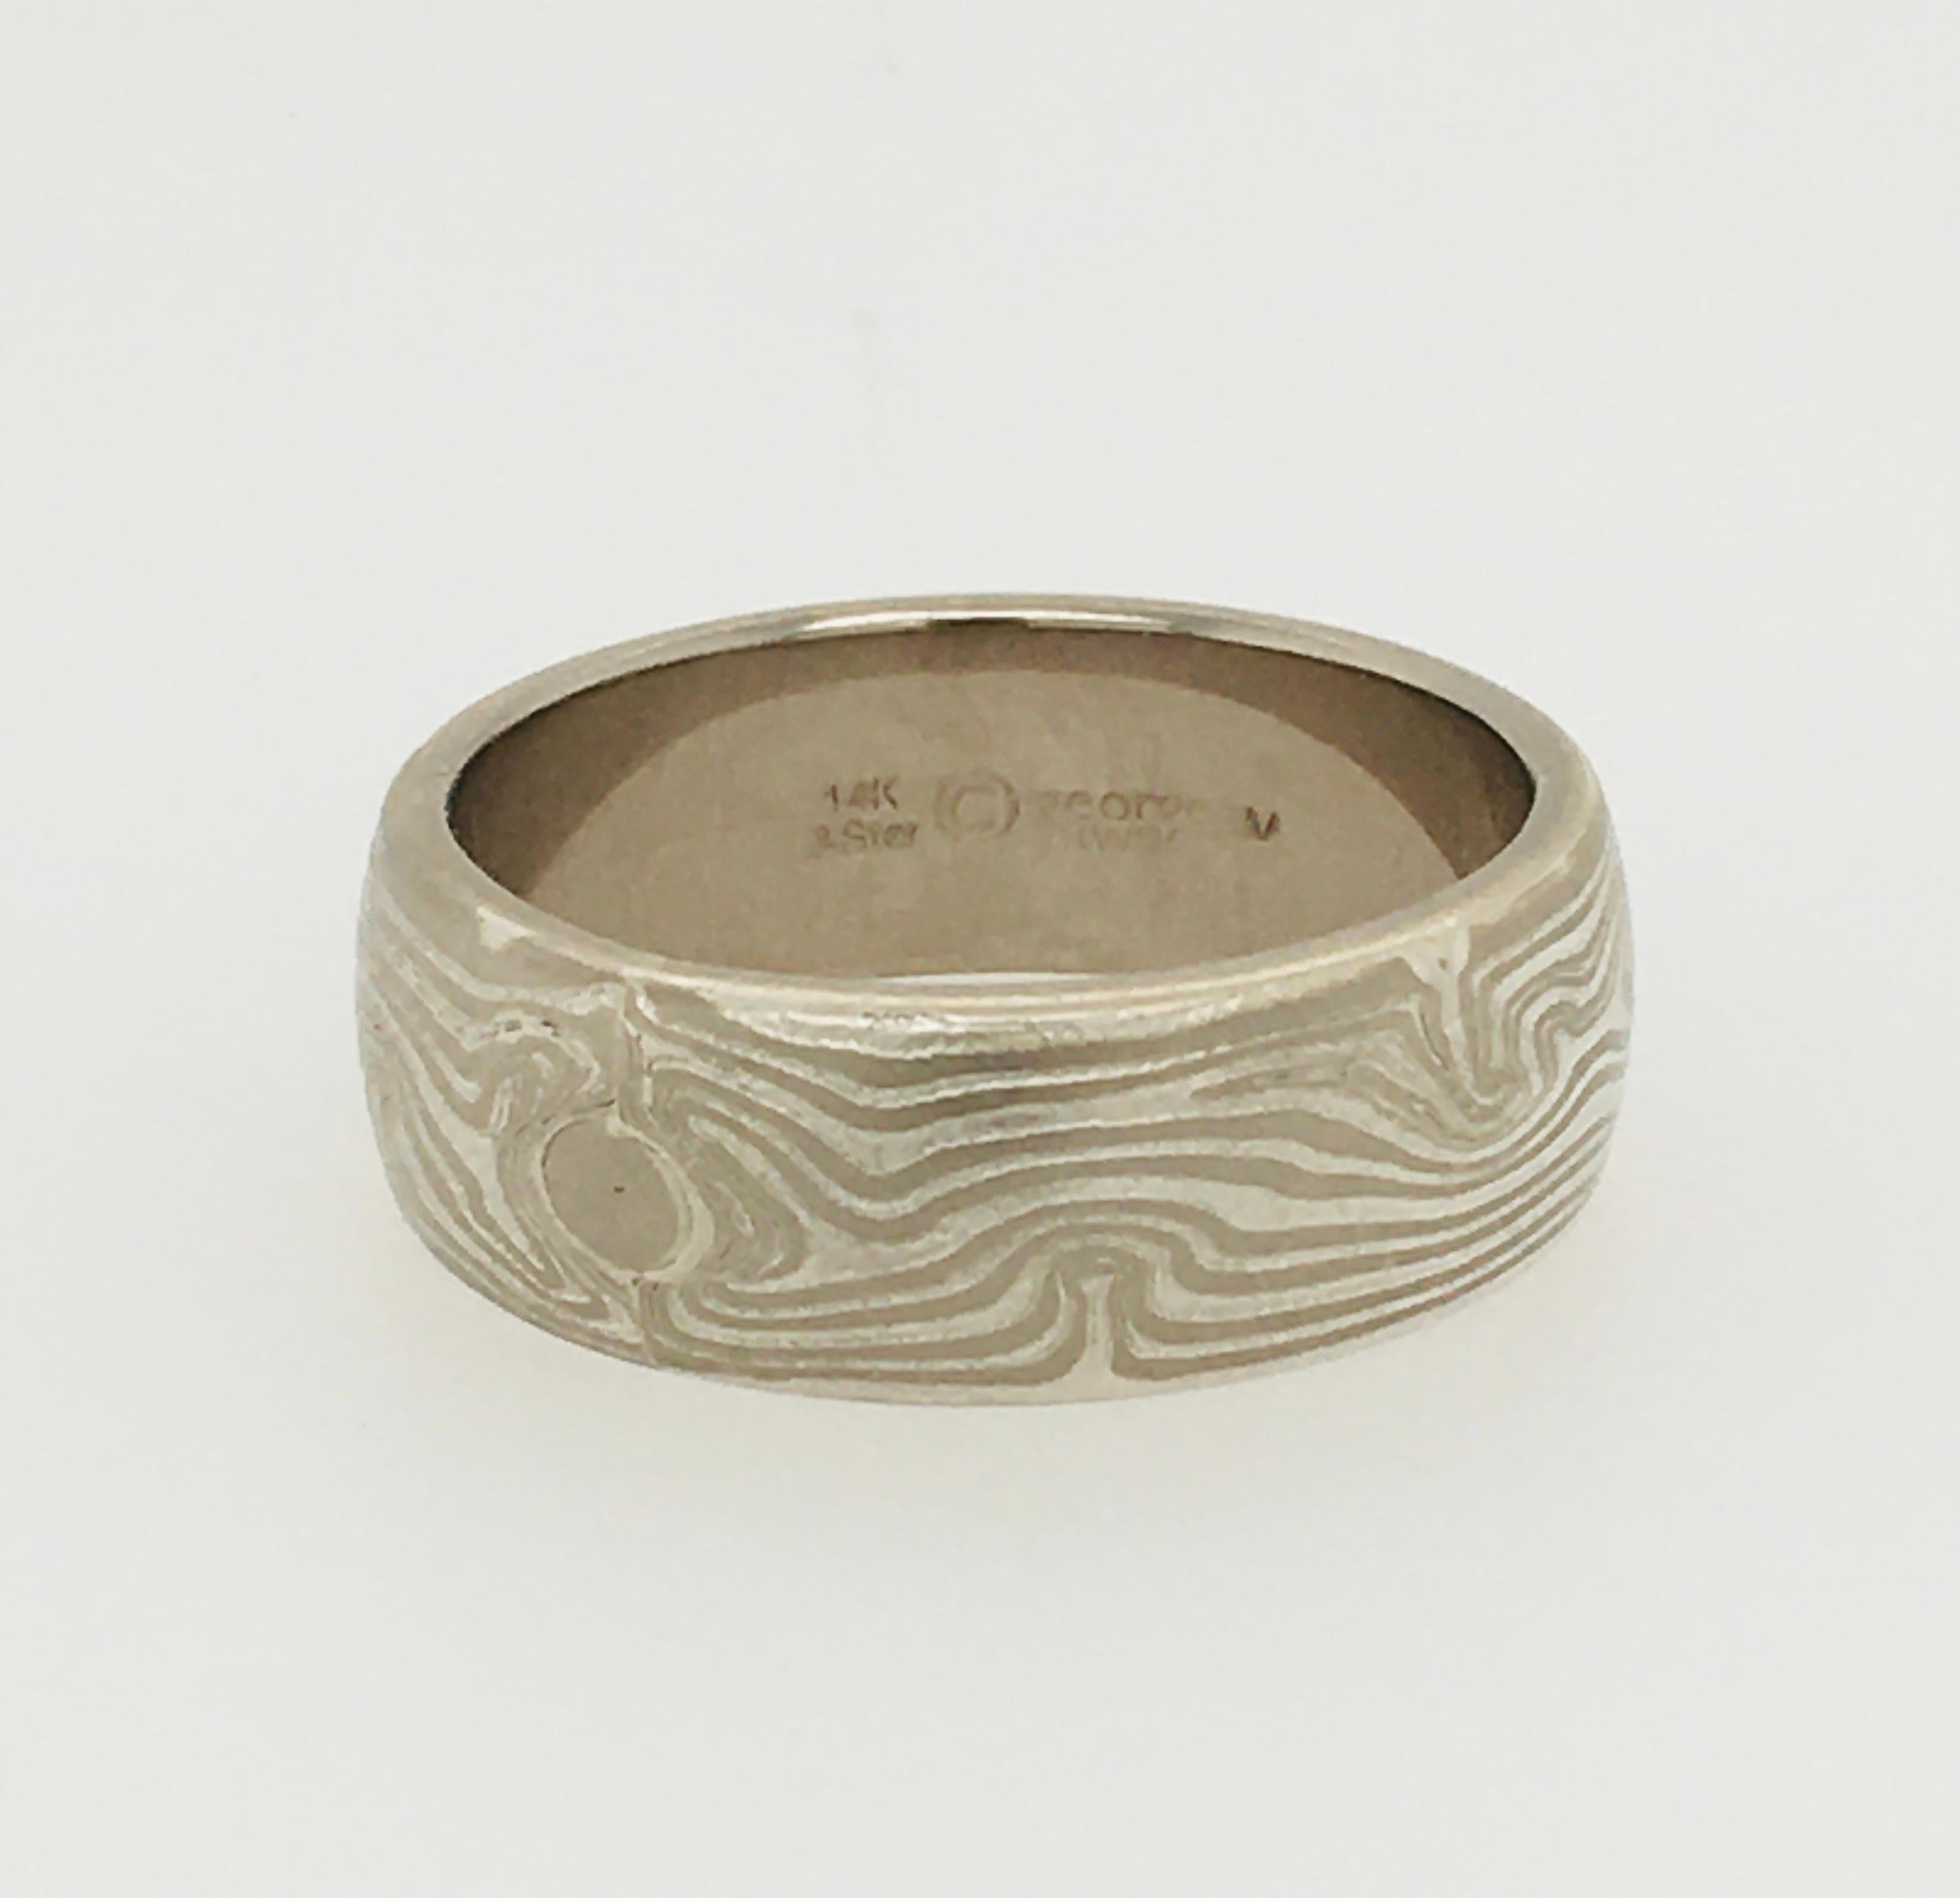 GEORGE SAWYER Half-Round Edge Mokume Gold & Etched Sterling Wedding Band  In Excellent Condition For Sale In Kennebunkport, ME